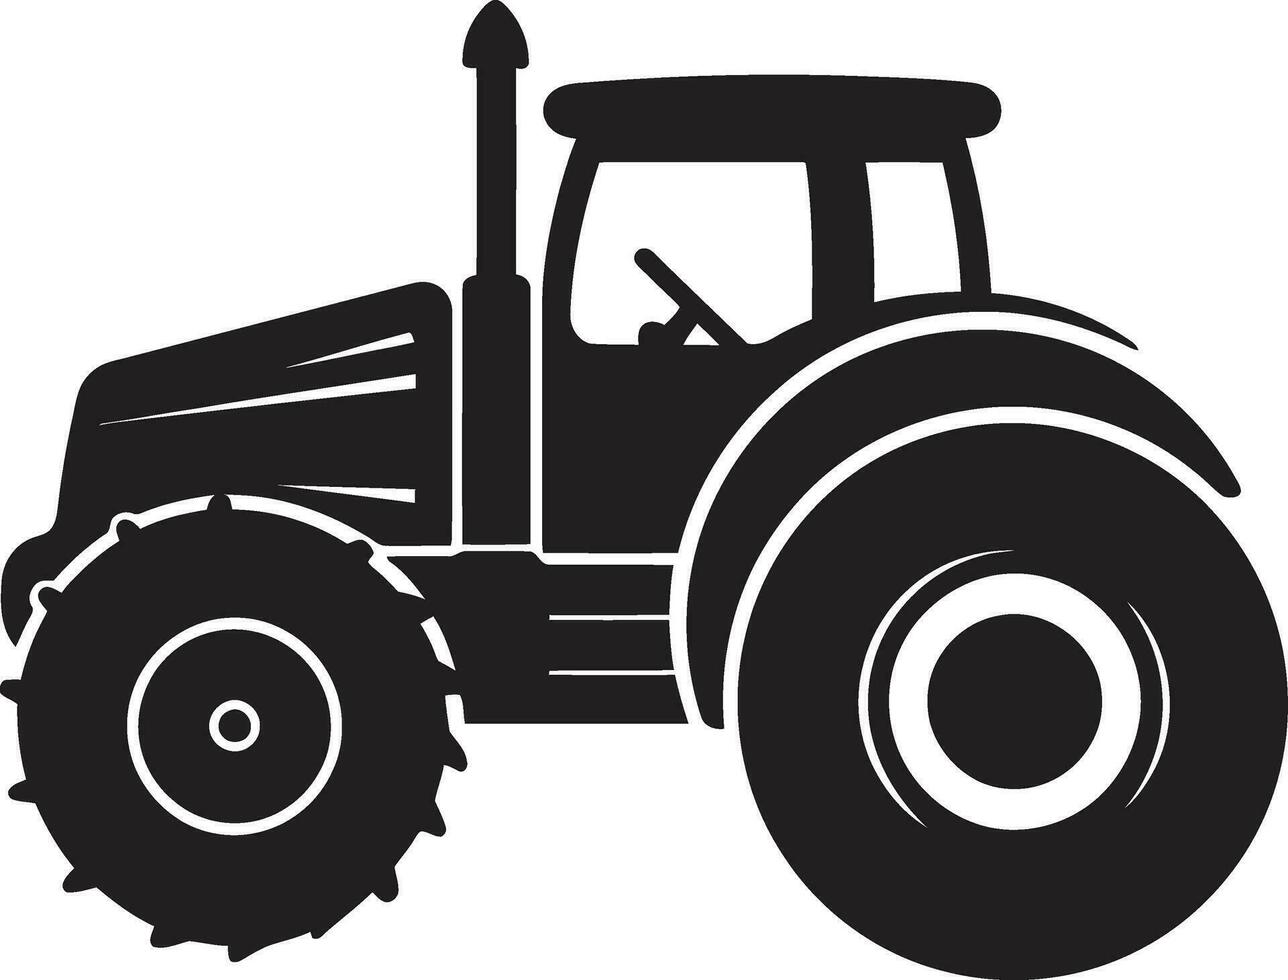 Tractor Silhouette Vector Illustration Black and White Tractor Blueprint